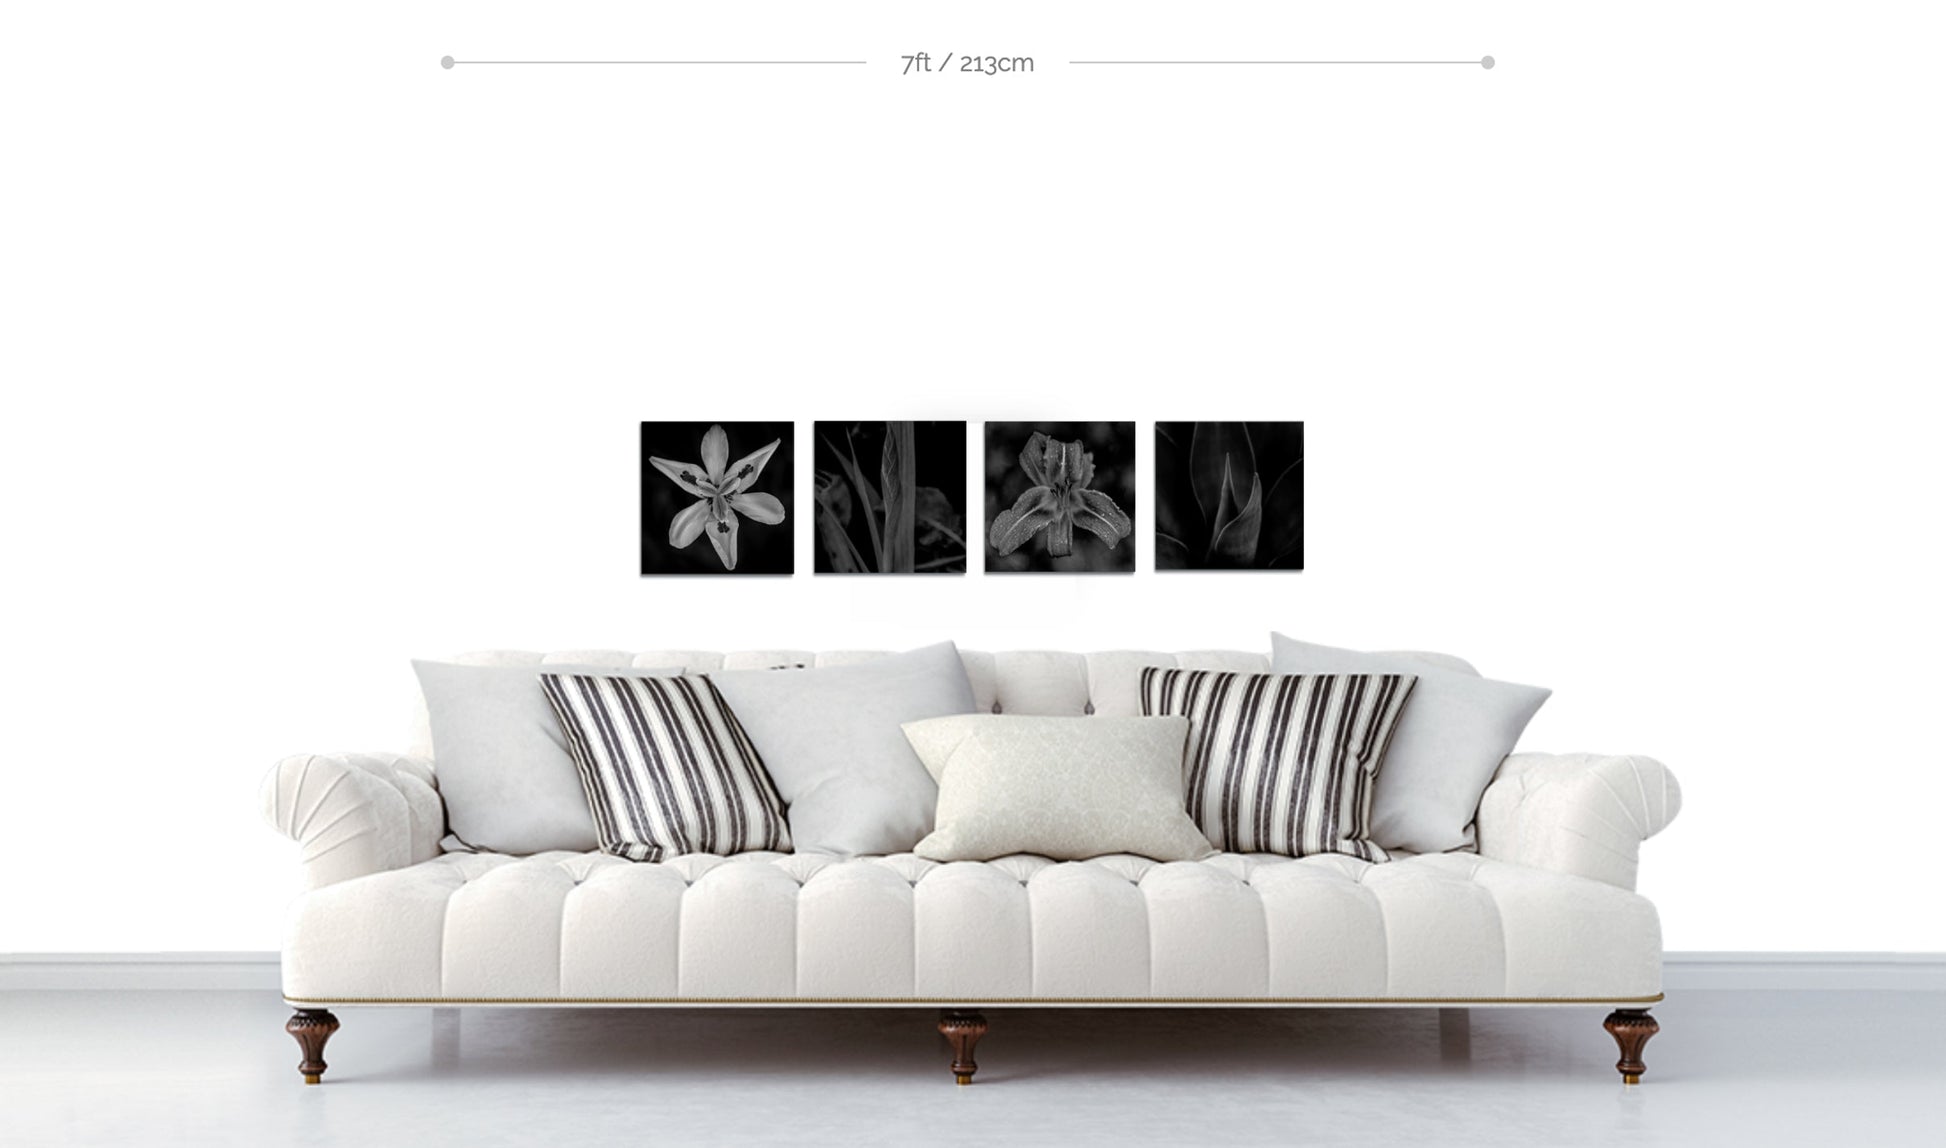 Small metal flower wall decor set of 4 prints arranged in horizontal line above white sofa